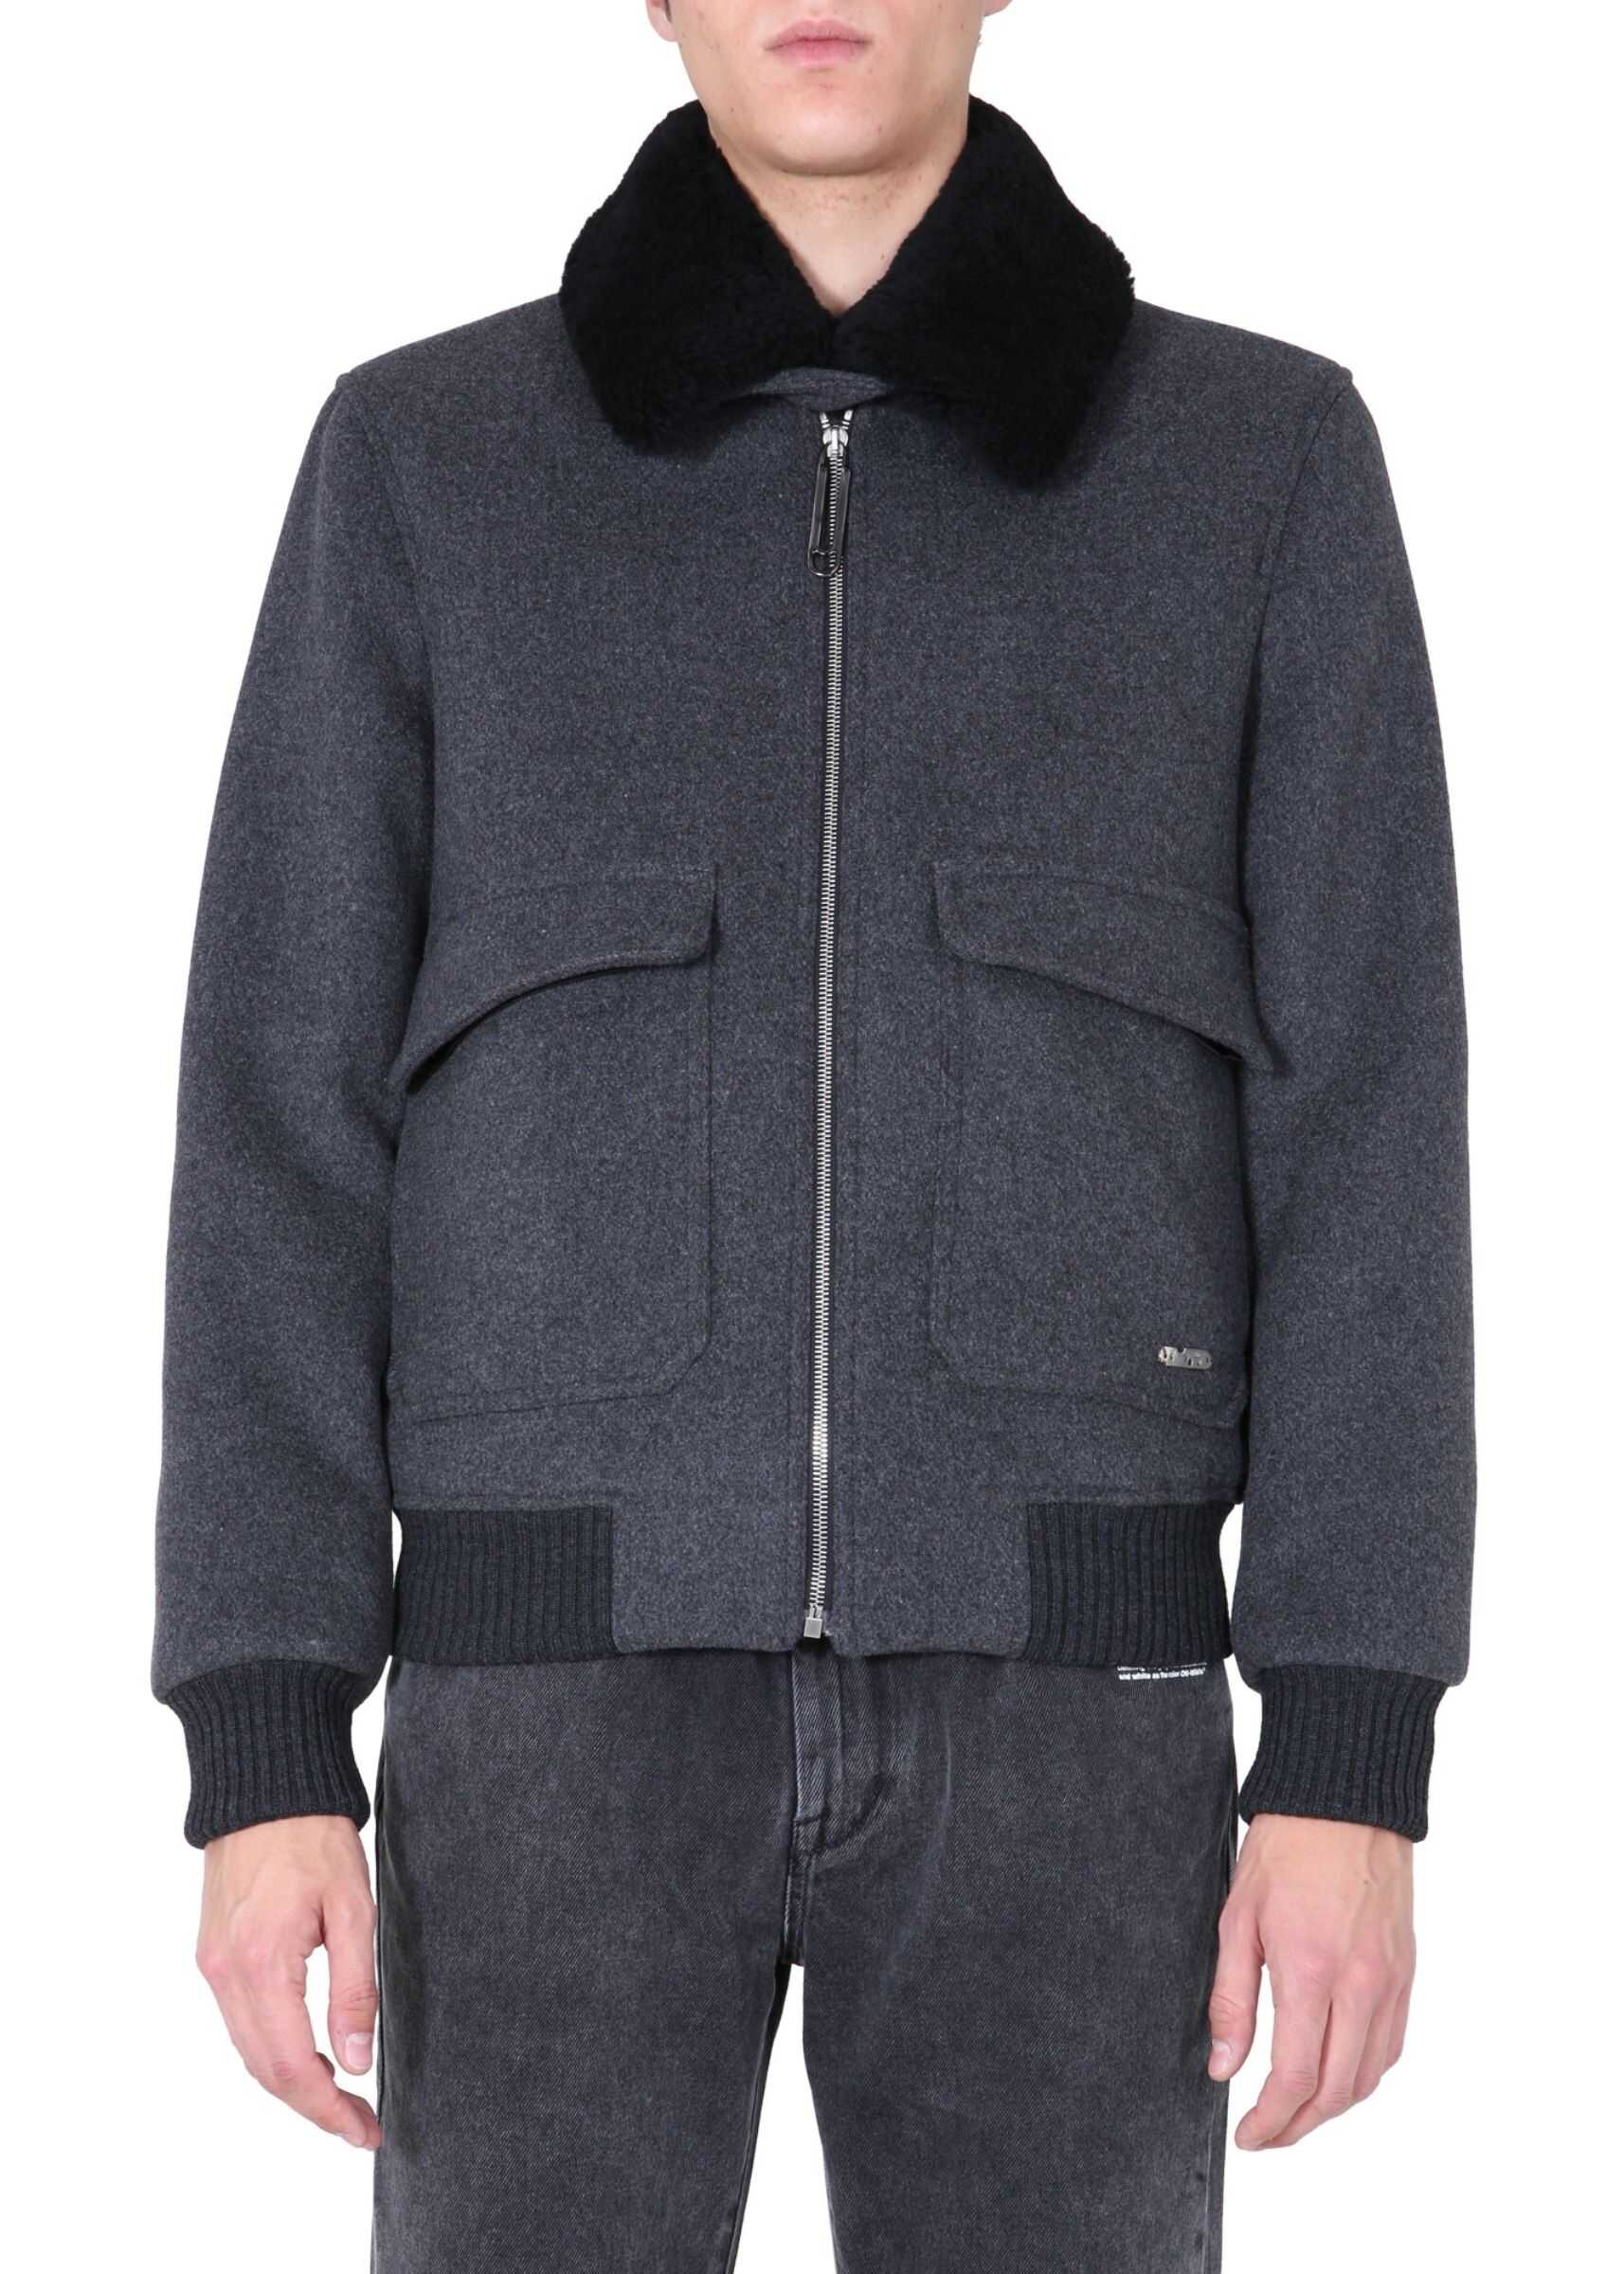 Off-White Aviator Jacket With Shearling Collar GREY